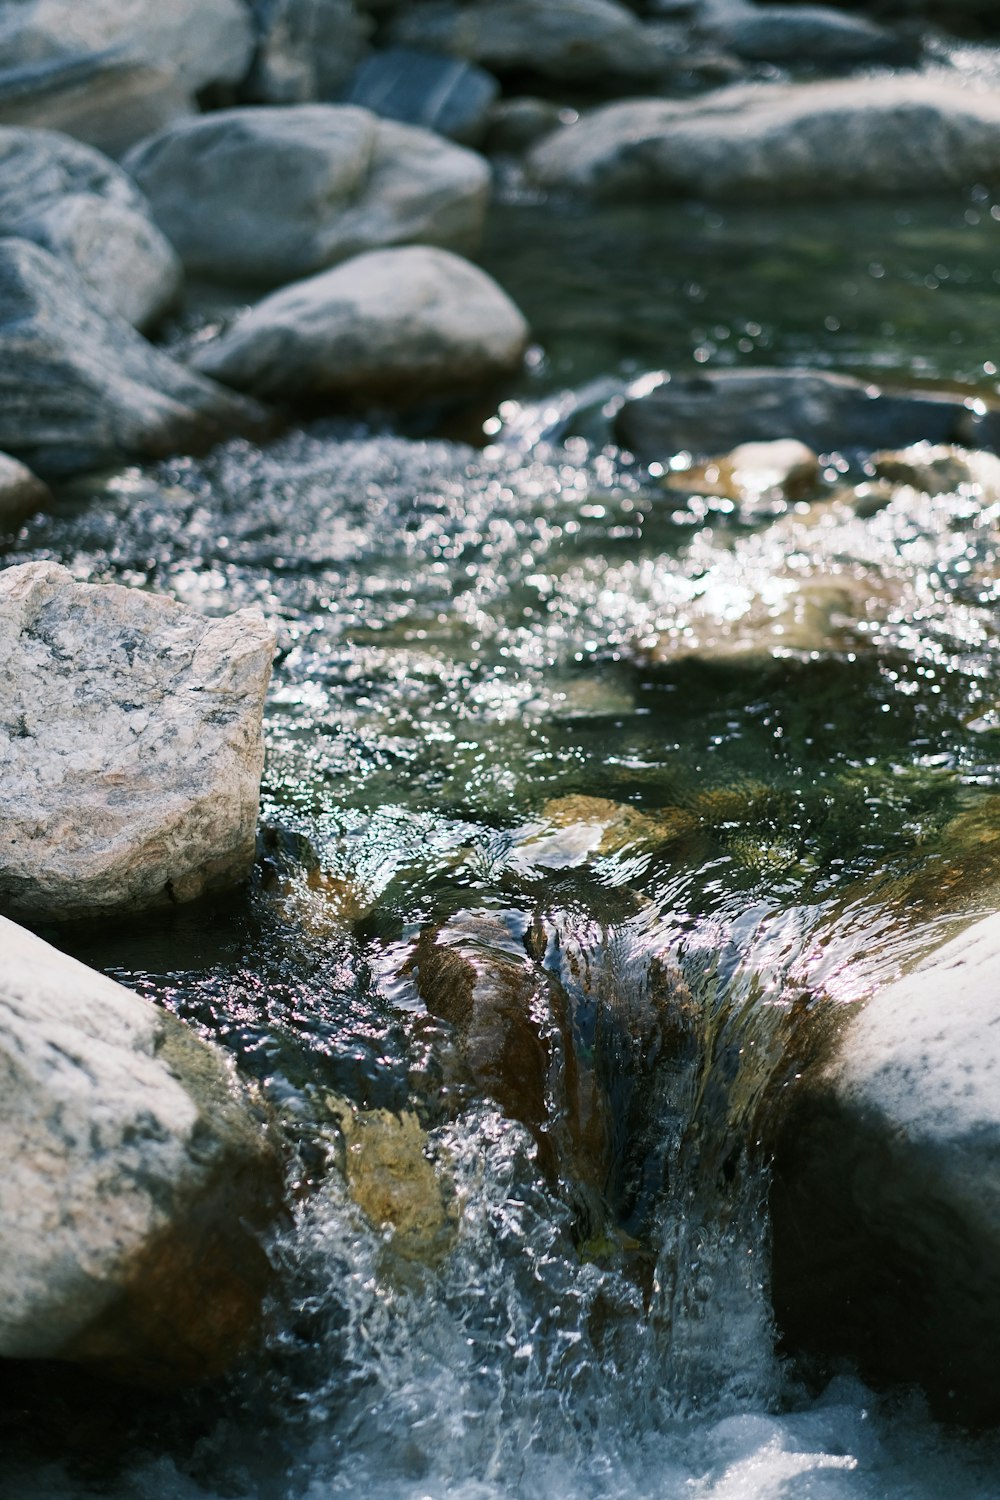 a close up of a stream of water with rocks